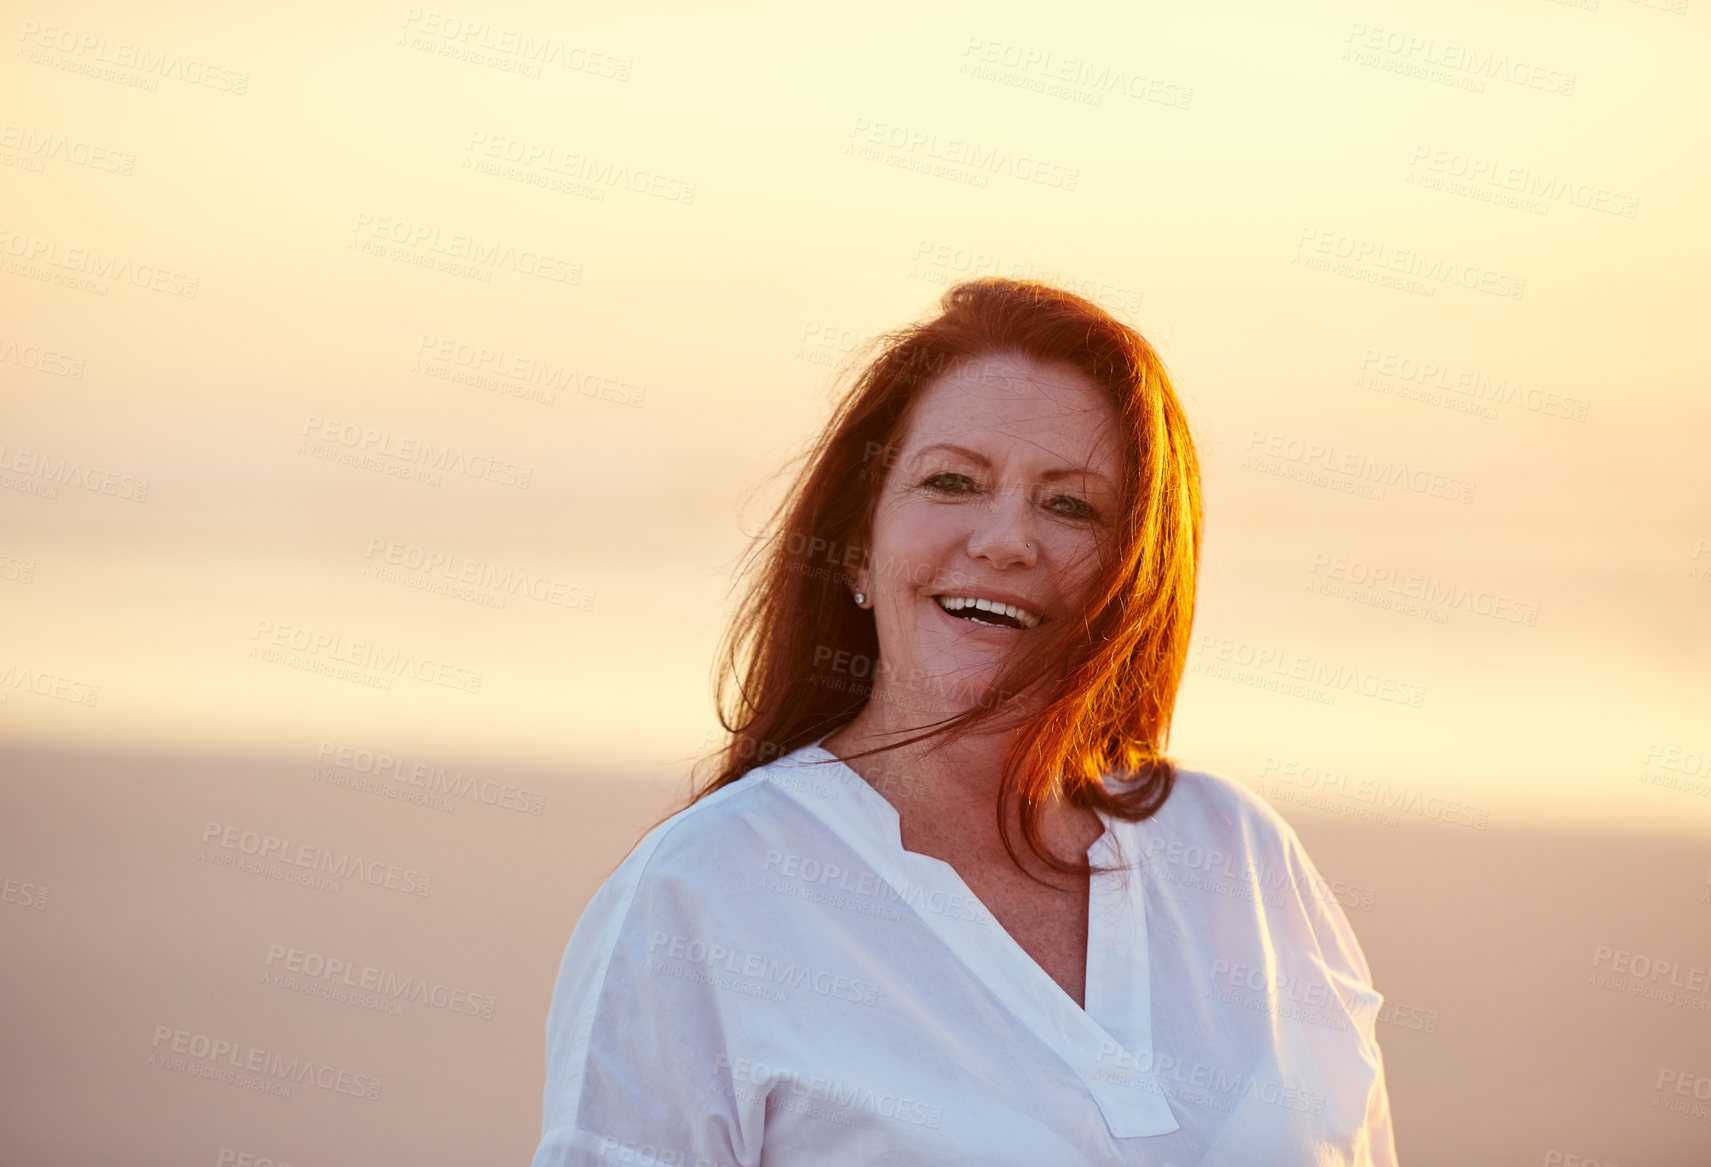 Buy stock photo Shot of mature woman standing on the beach at sunset